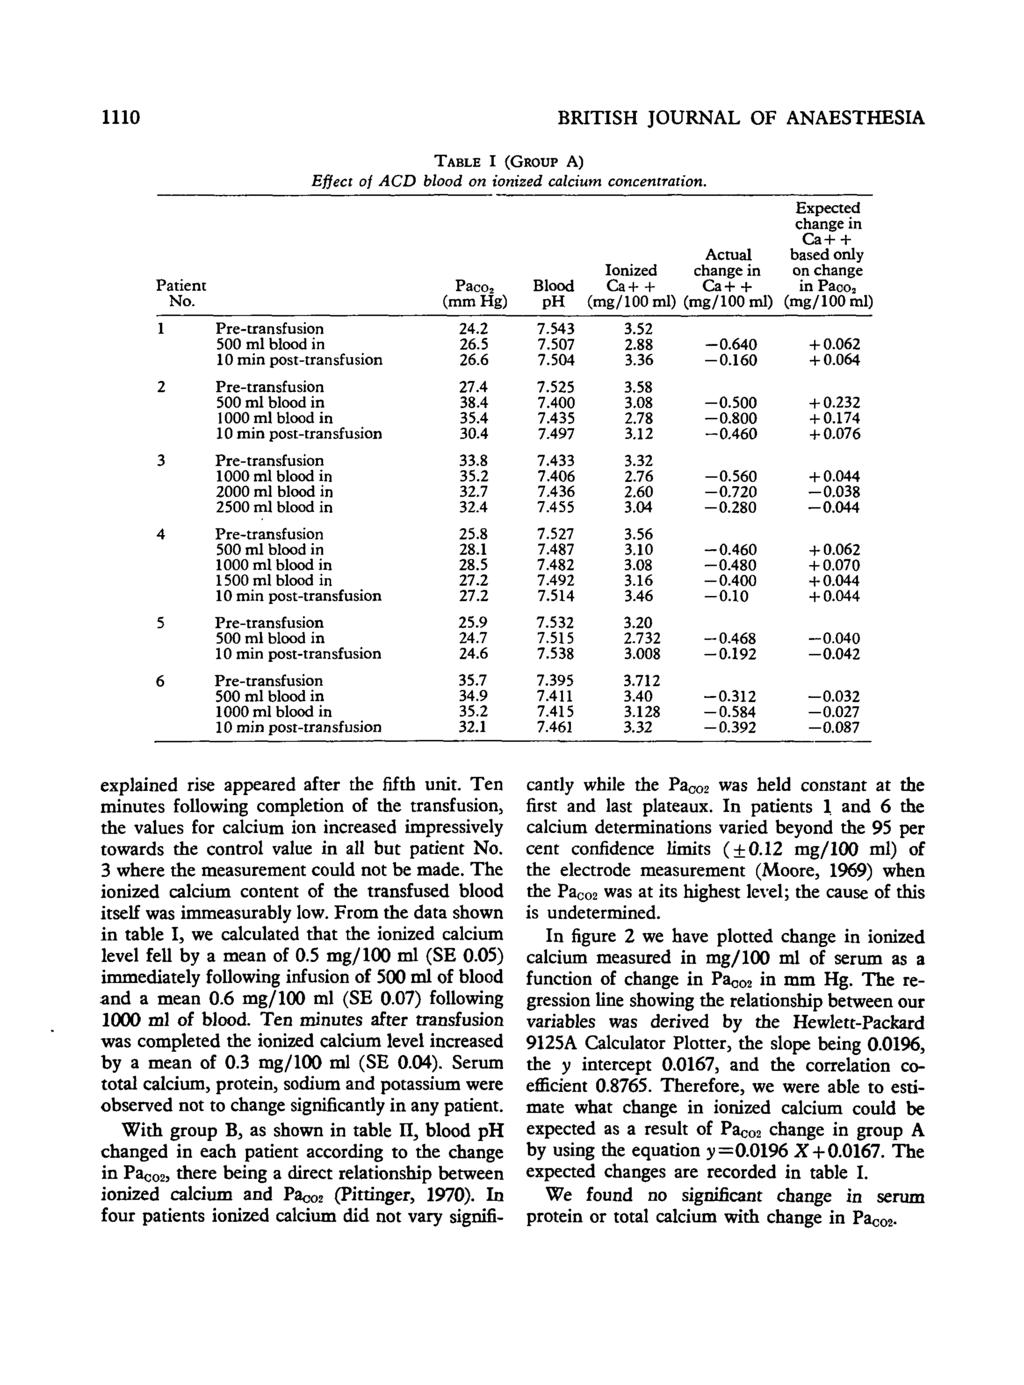 1110 BRITISH JOURNAL OF ANAESTHESIA Patient No. 1 2 3 4 5 6 2000 ml blood in 2 1 TABLE I (GROUP A) Effect of ACD blood on ionized calcium concentration. Paco 2 (mmhg) 24.2 26.5 26.6 27.4 38.4 35.4 30.